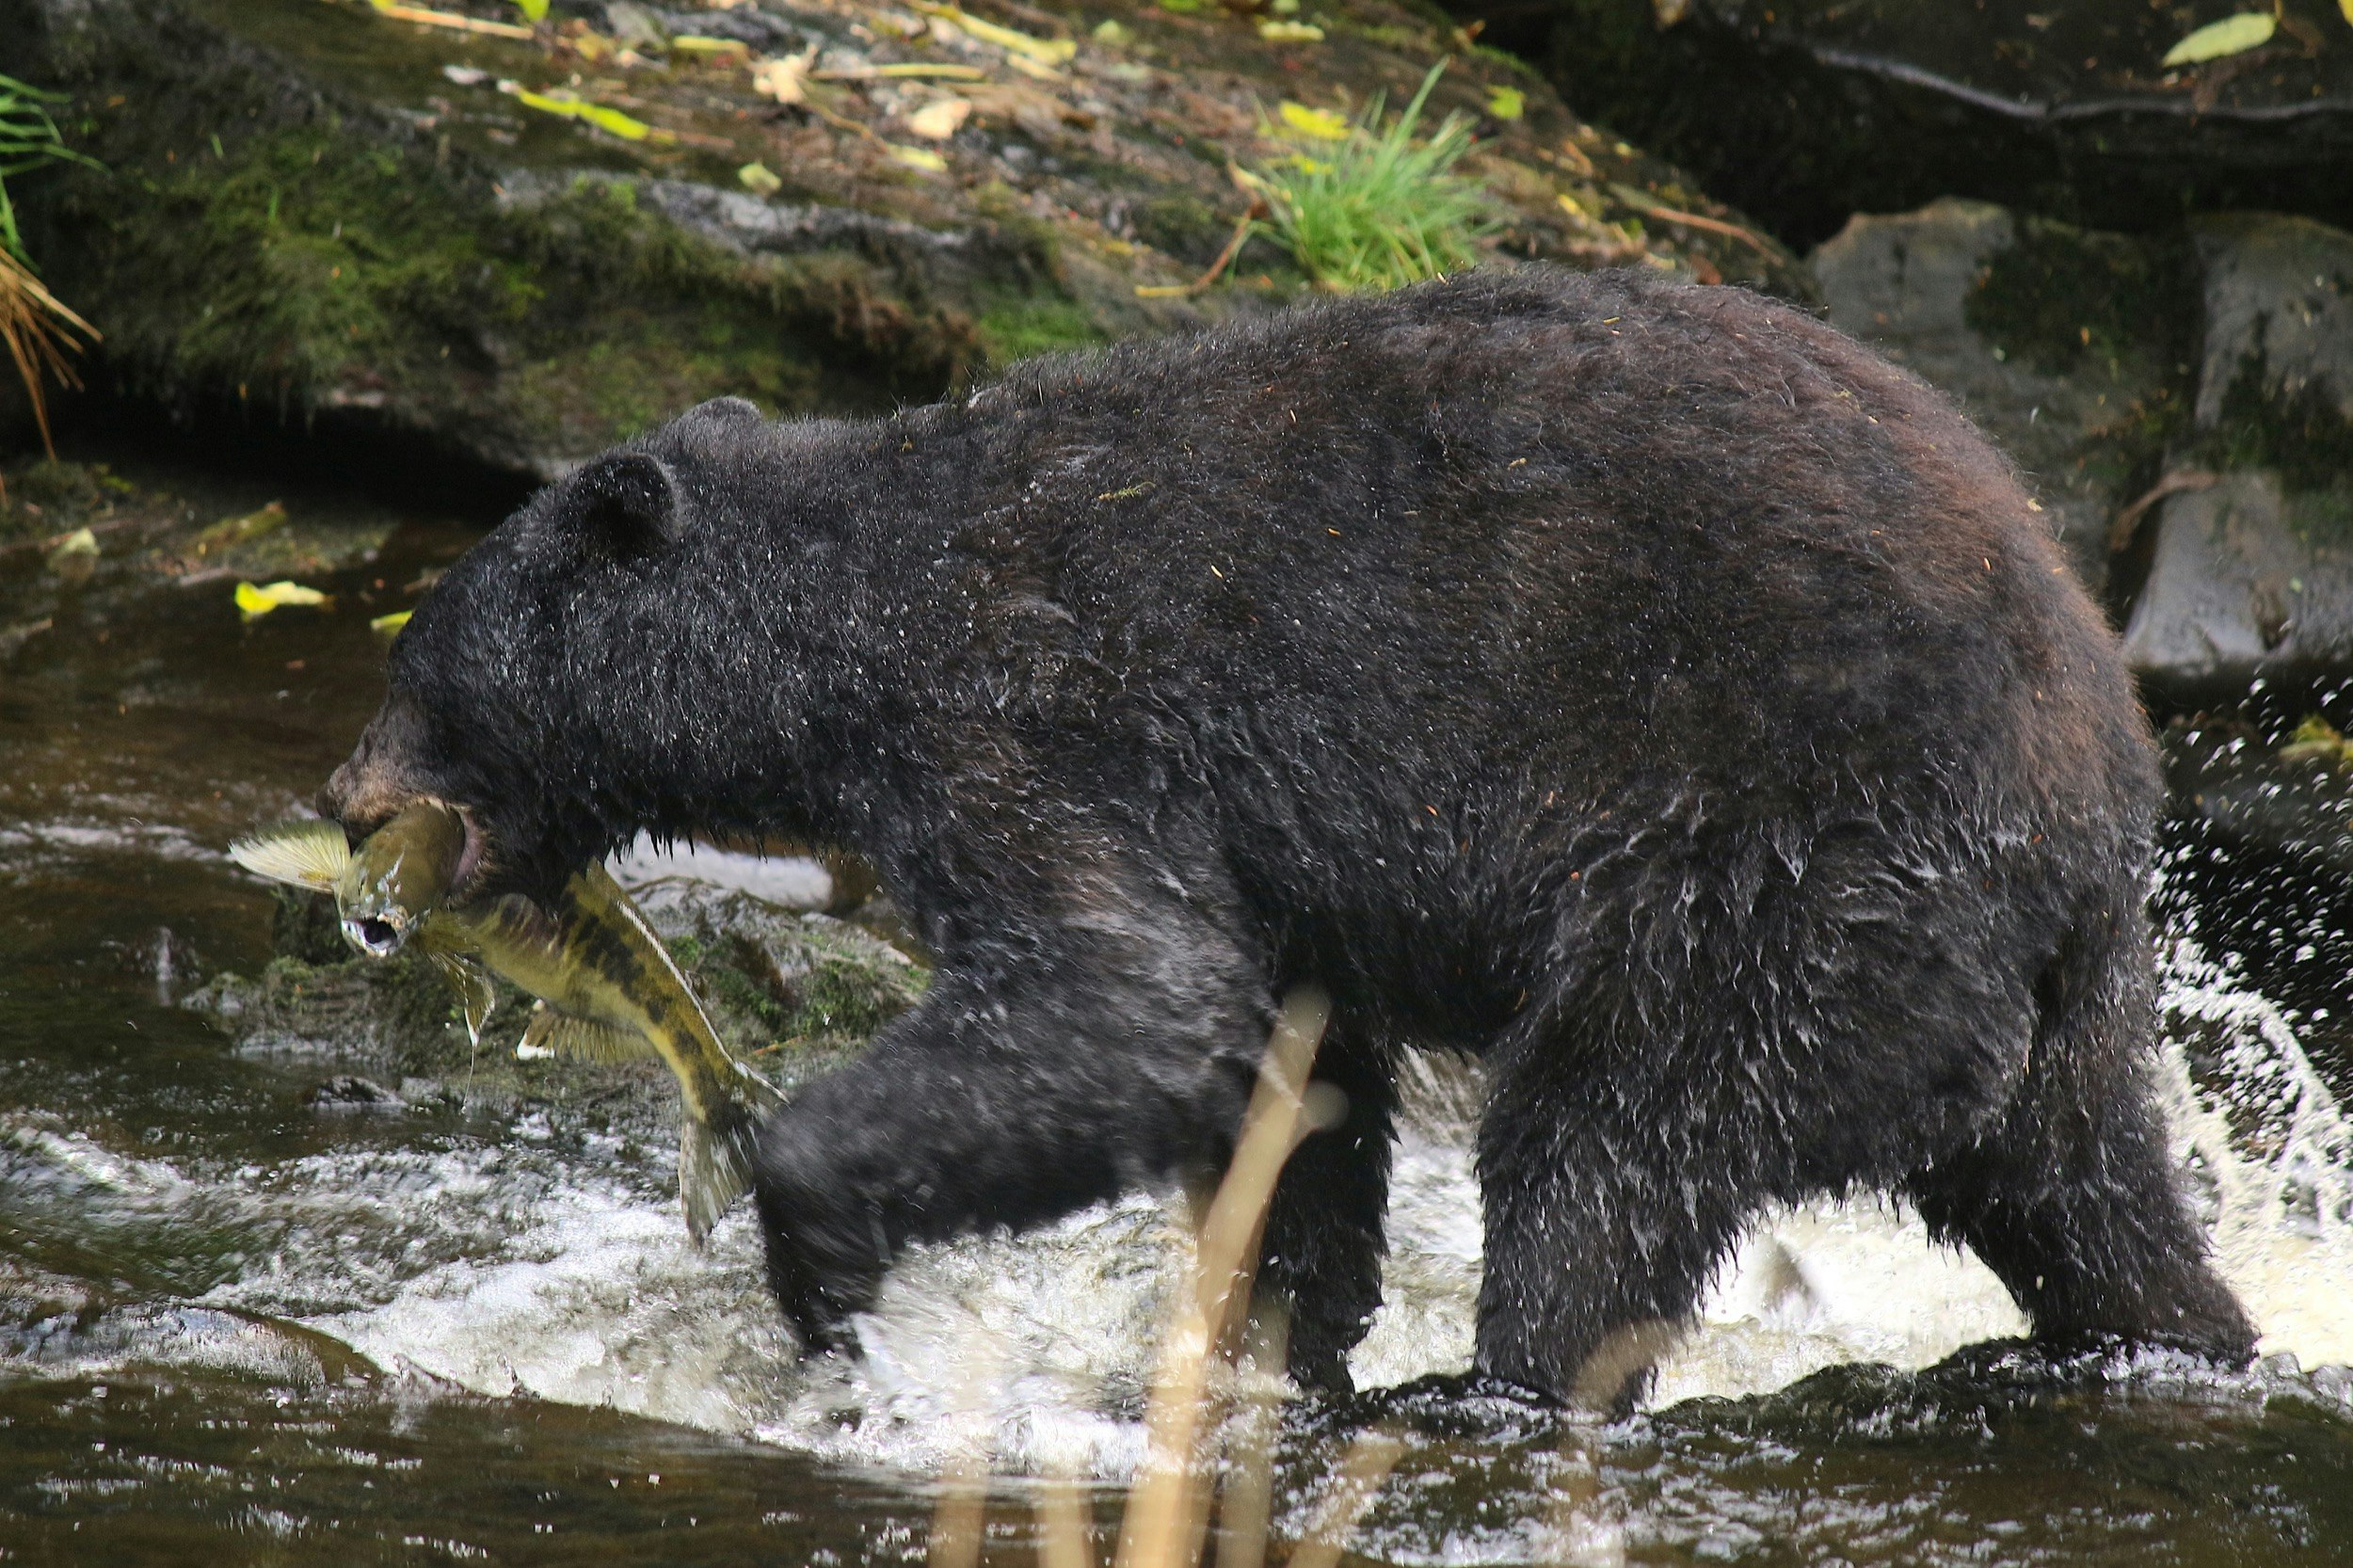 A bear with a salmon in its mouth has water dripping from his fur as he leaves a stream in Alaska's Tongass National Forest